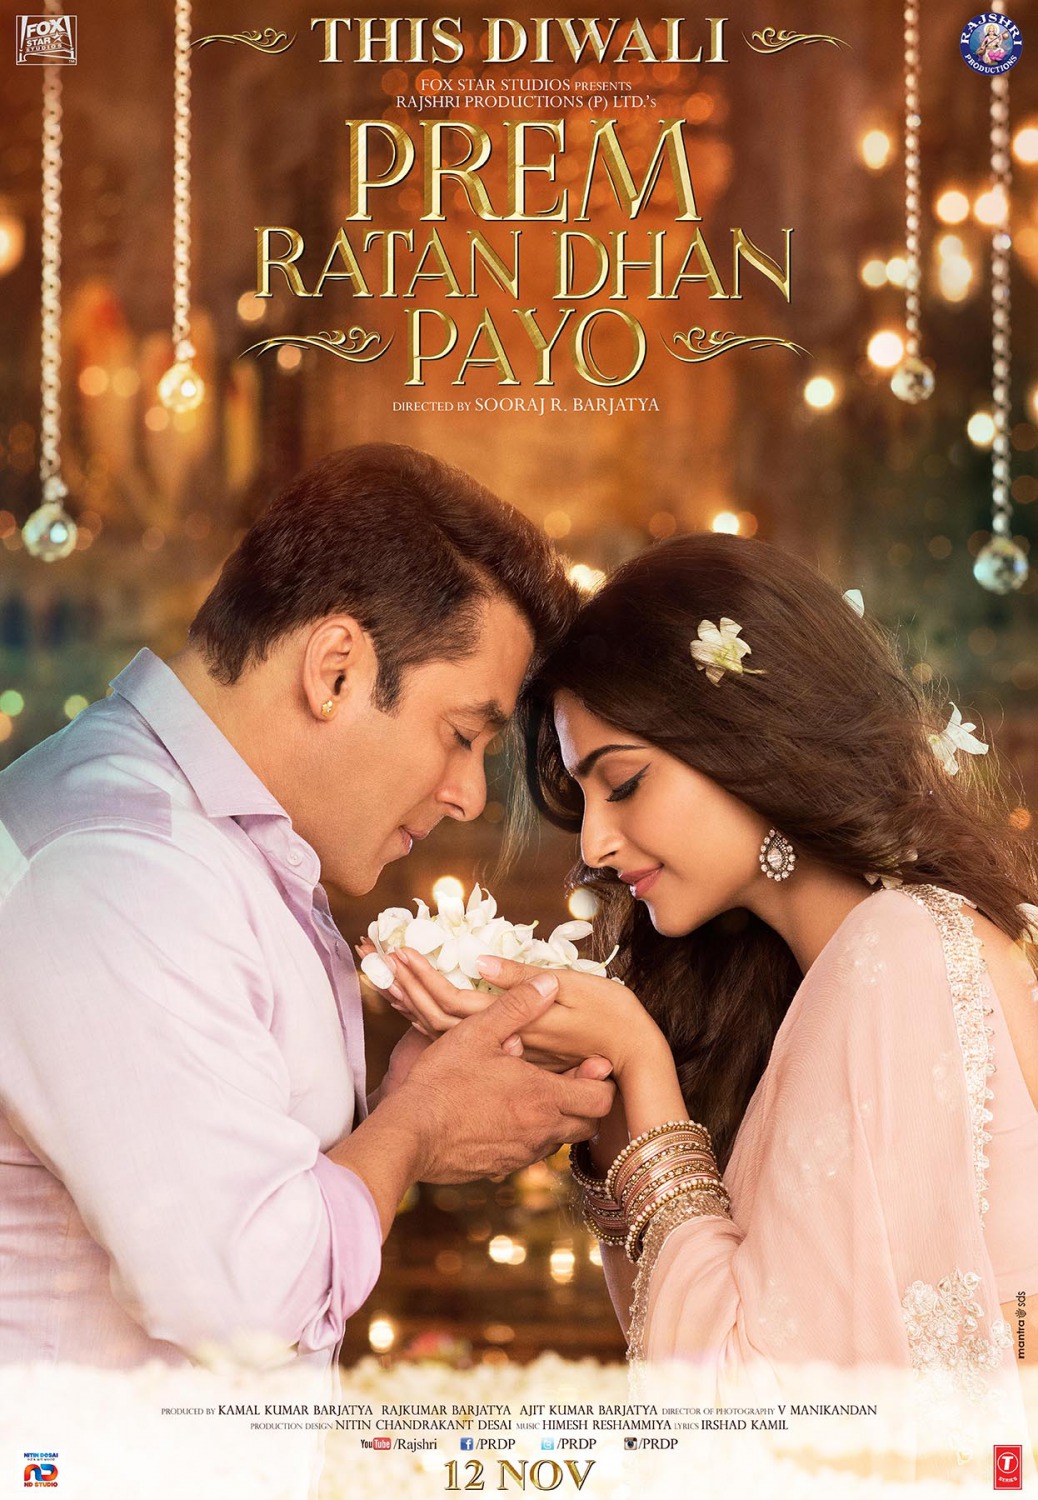 Extra Large Movie Poster Image for Prem Ratan Dhan Payo (#9 of 9)